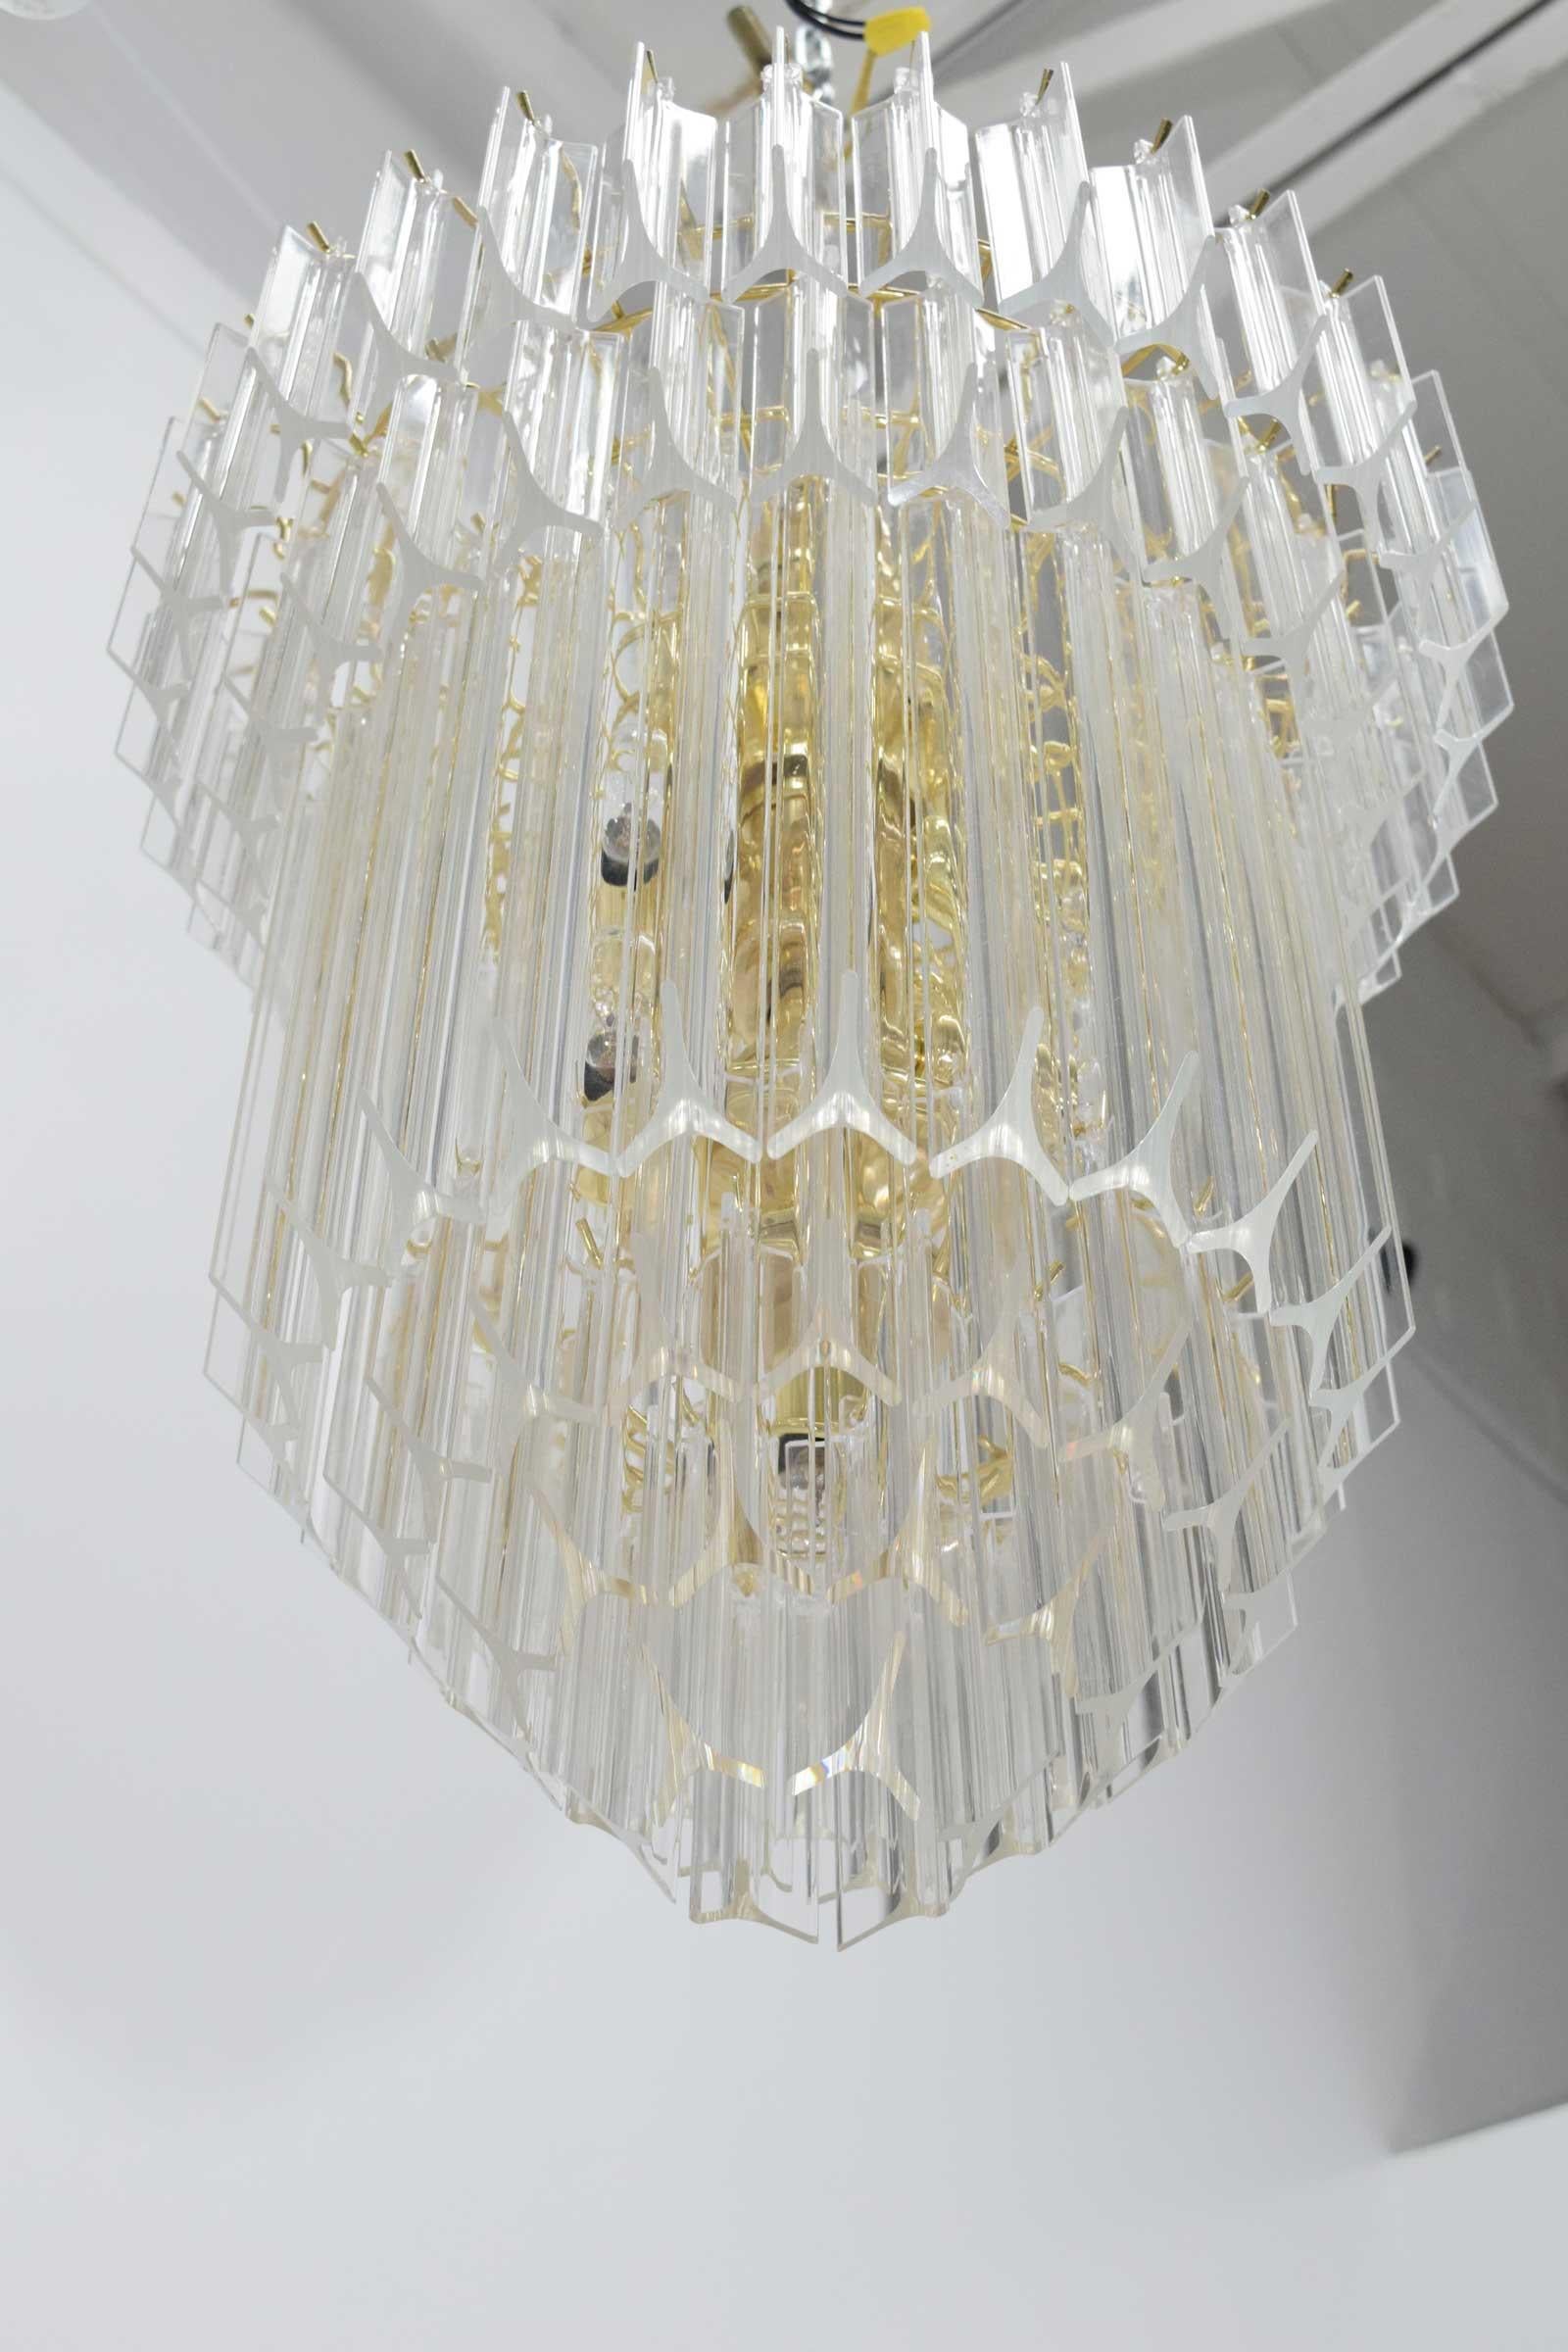 Mid-Century Modern Large Lucite Chandelier, Six Tiers, 1970s For Sale